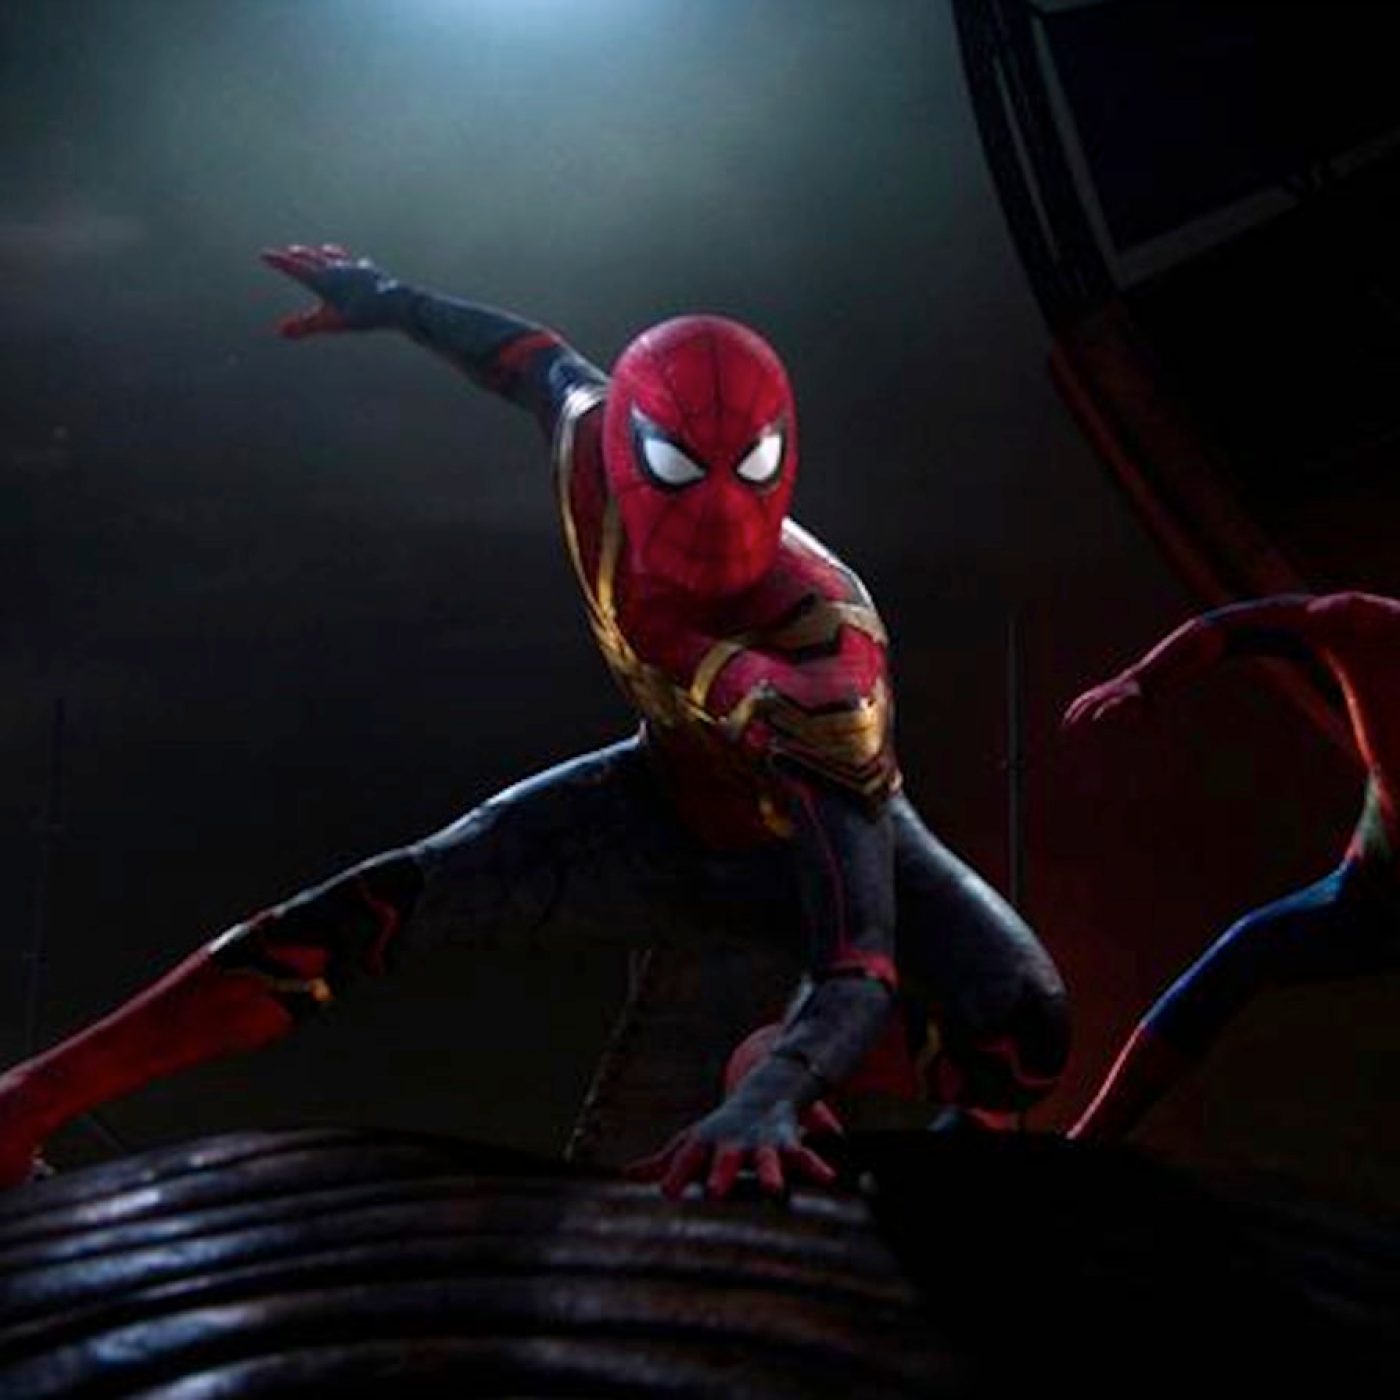 Spider-Man: No Way Home hits HBO Max in July, but not in the US